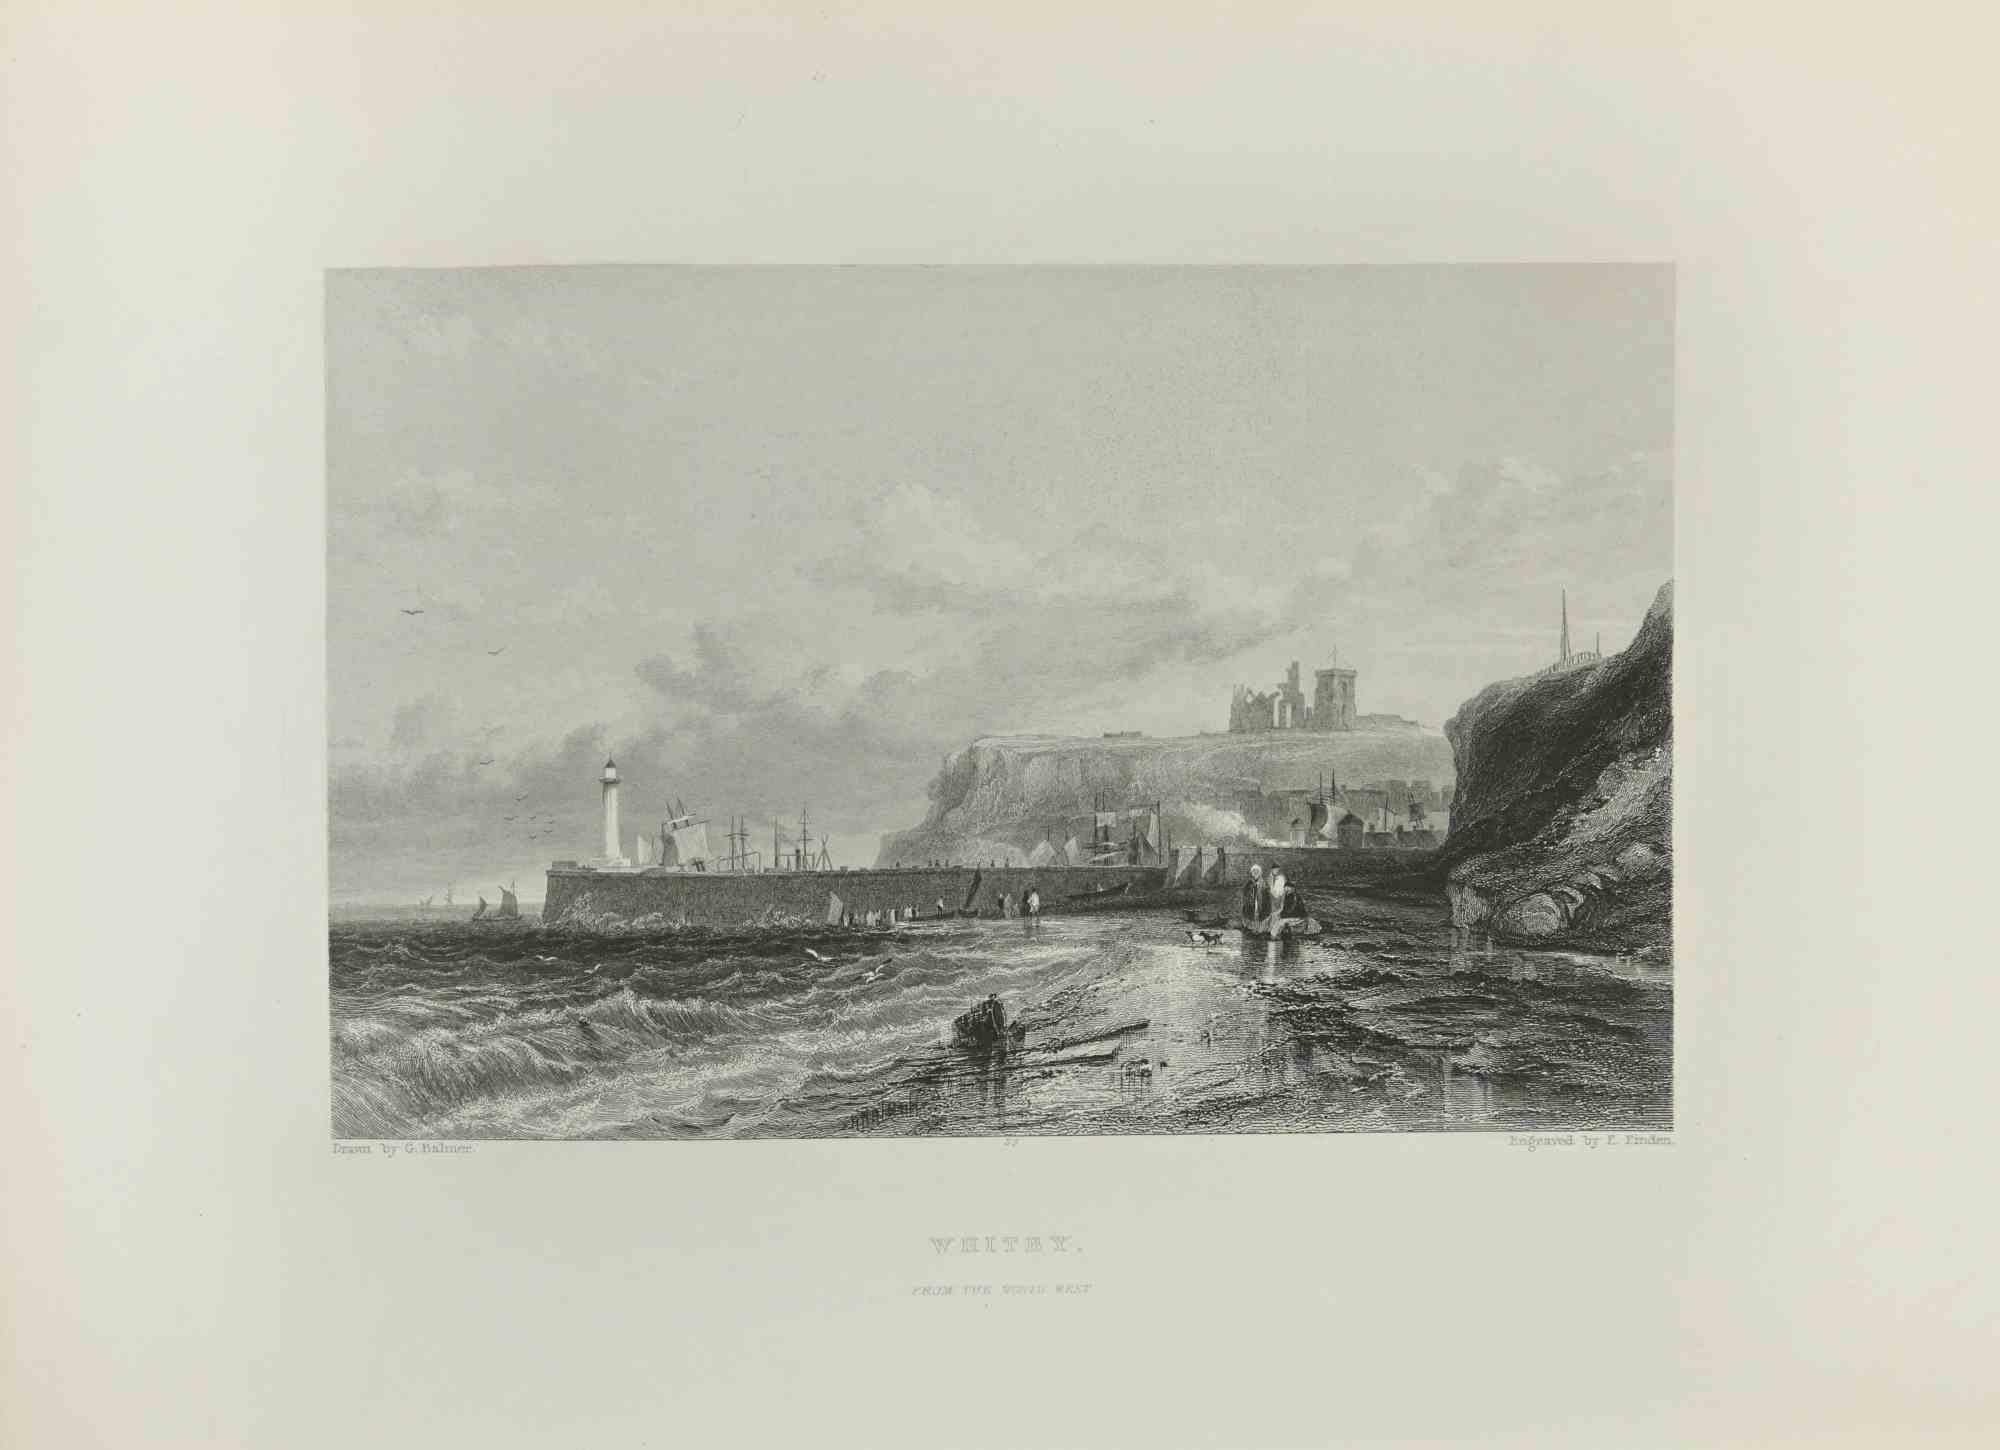 Whitby is an etching realized in 1845 by Edward Francis Finden.

Signed on the plate.

Titled on the lower center, from the series of "Ports of Great Britain"

The artwork is beautifully realized in a well-balanced composition through short, deft